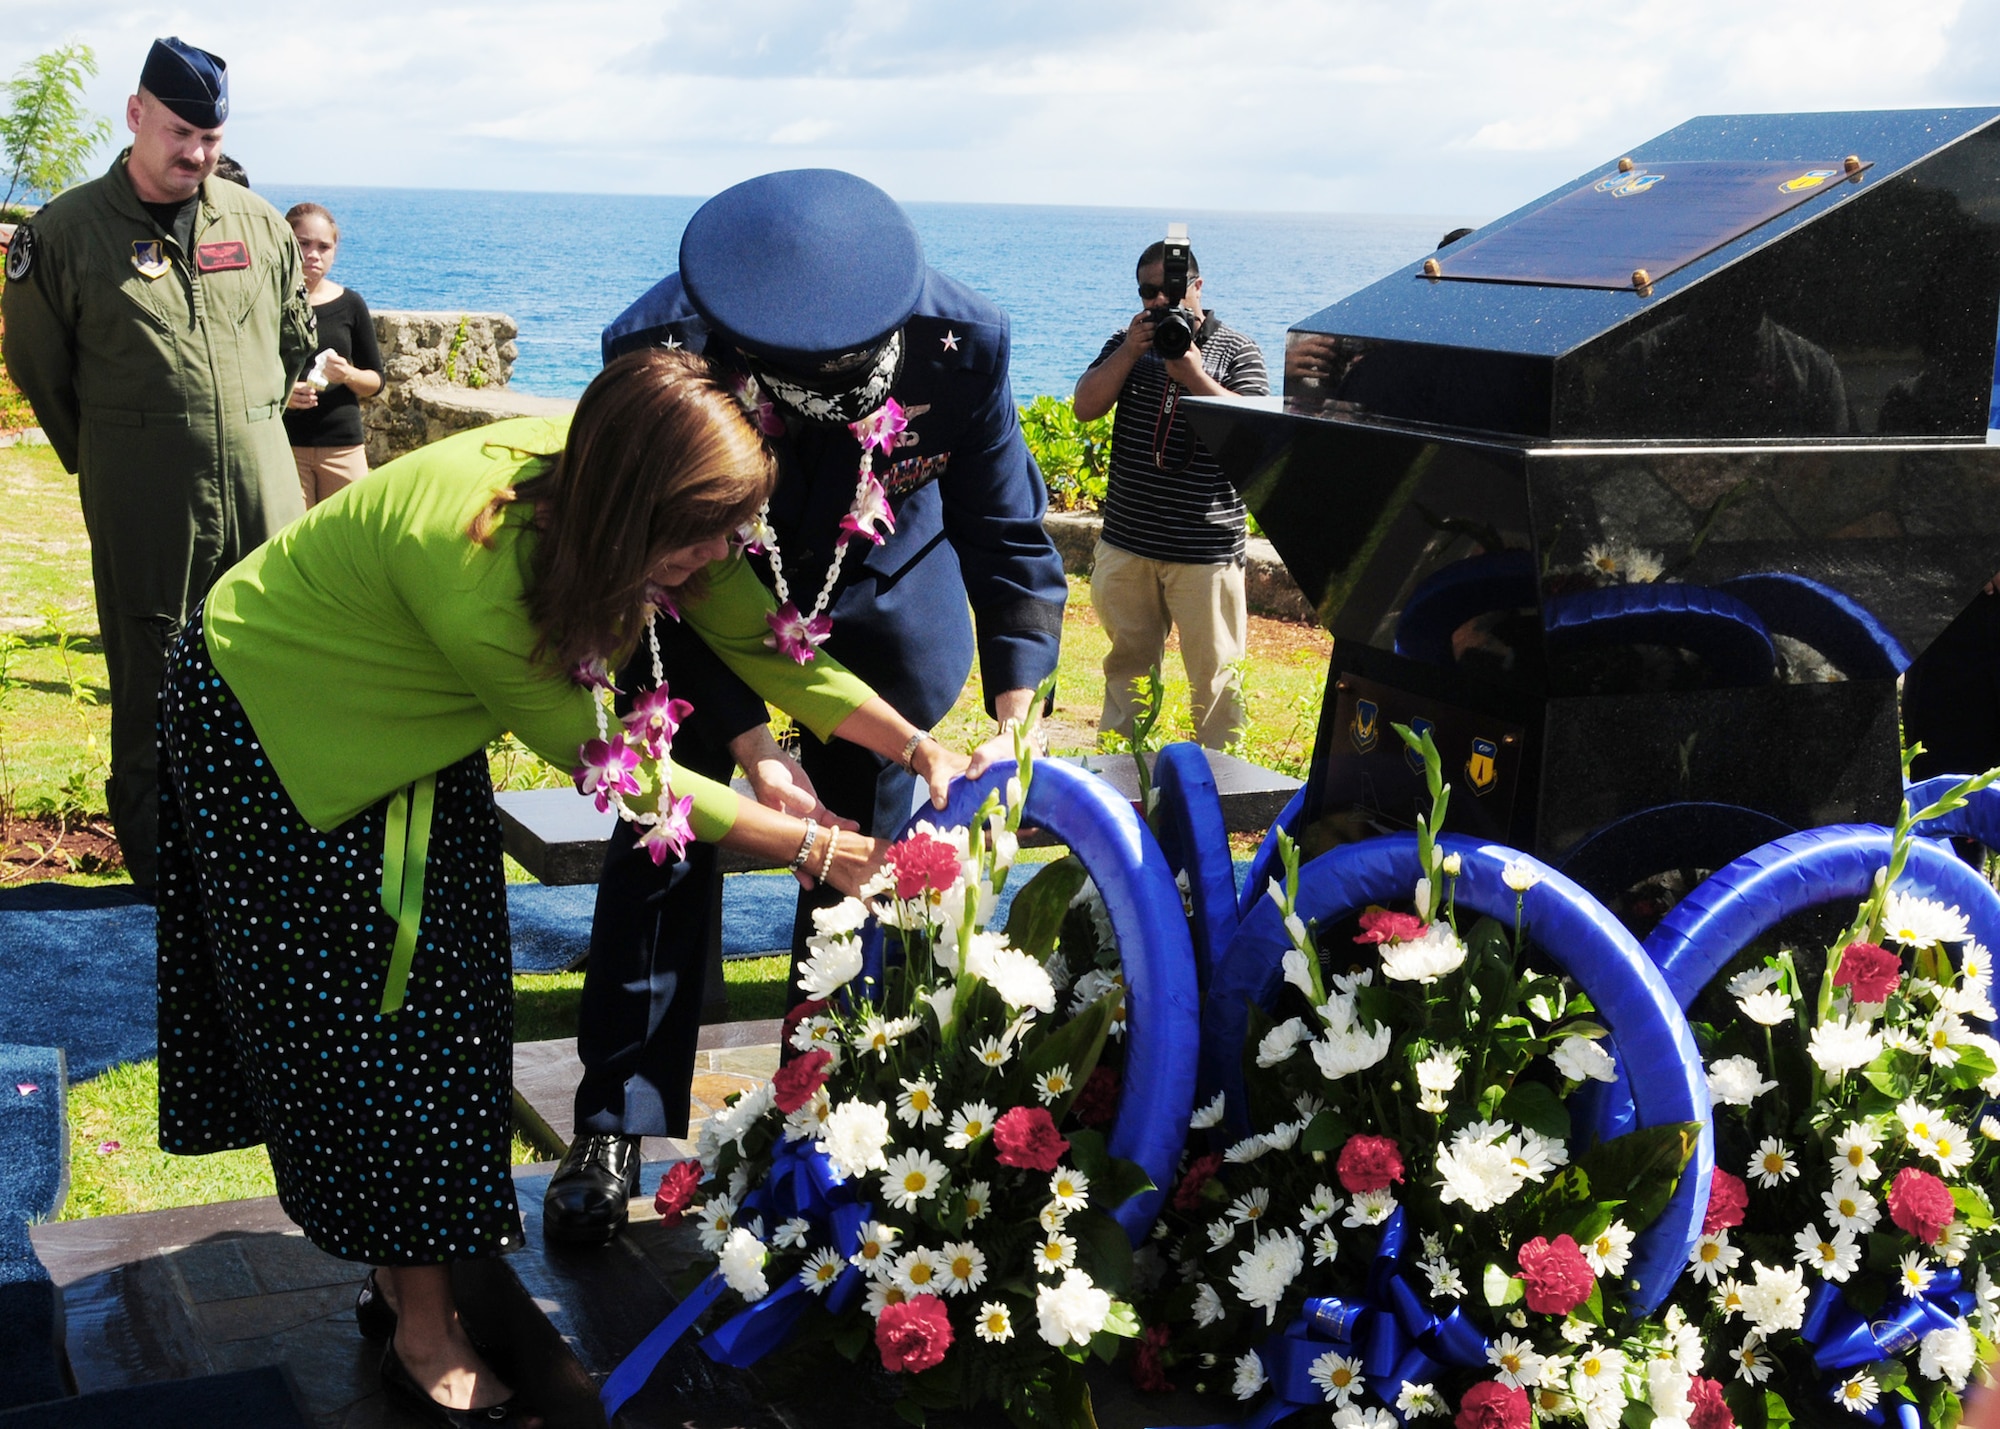 Brig. Gen. Phil Ruhlman, commander of the 36th Wing at Andersen Air Force Base, Guam, and wife Lina Ruhlman lay a wreath at the base of the RAIDR 21 Monument at the Governor's Complex at Adelup Point in Hagatna, Guam, July 20.  They placed the wreath in remembrance of the six Airmen who were lost July 21, 2008, when a B-52 Stratofortress -- call sign RAIDR 21 -- crashed off the coast of Guam during a mission.  More than 300 family, friends and guests attended the ceremony and monument unveiling.  (U.S. Air Force photo/Senior Airman Nichelle Anderson)